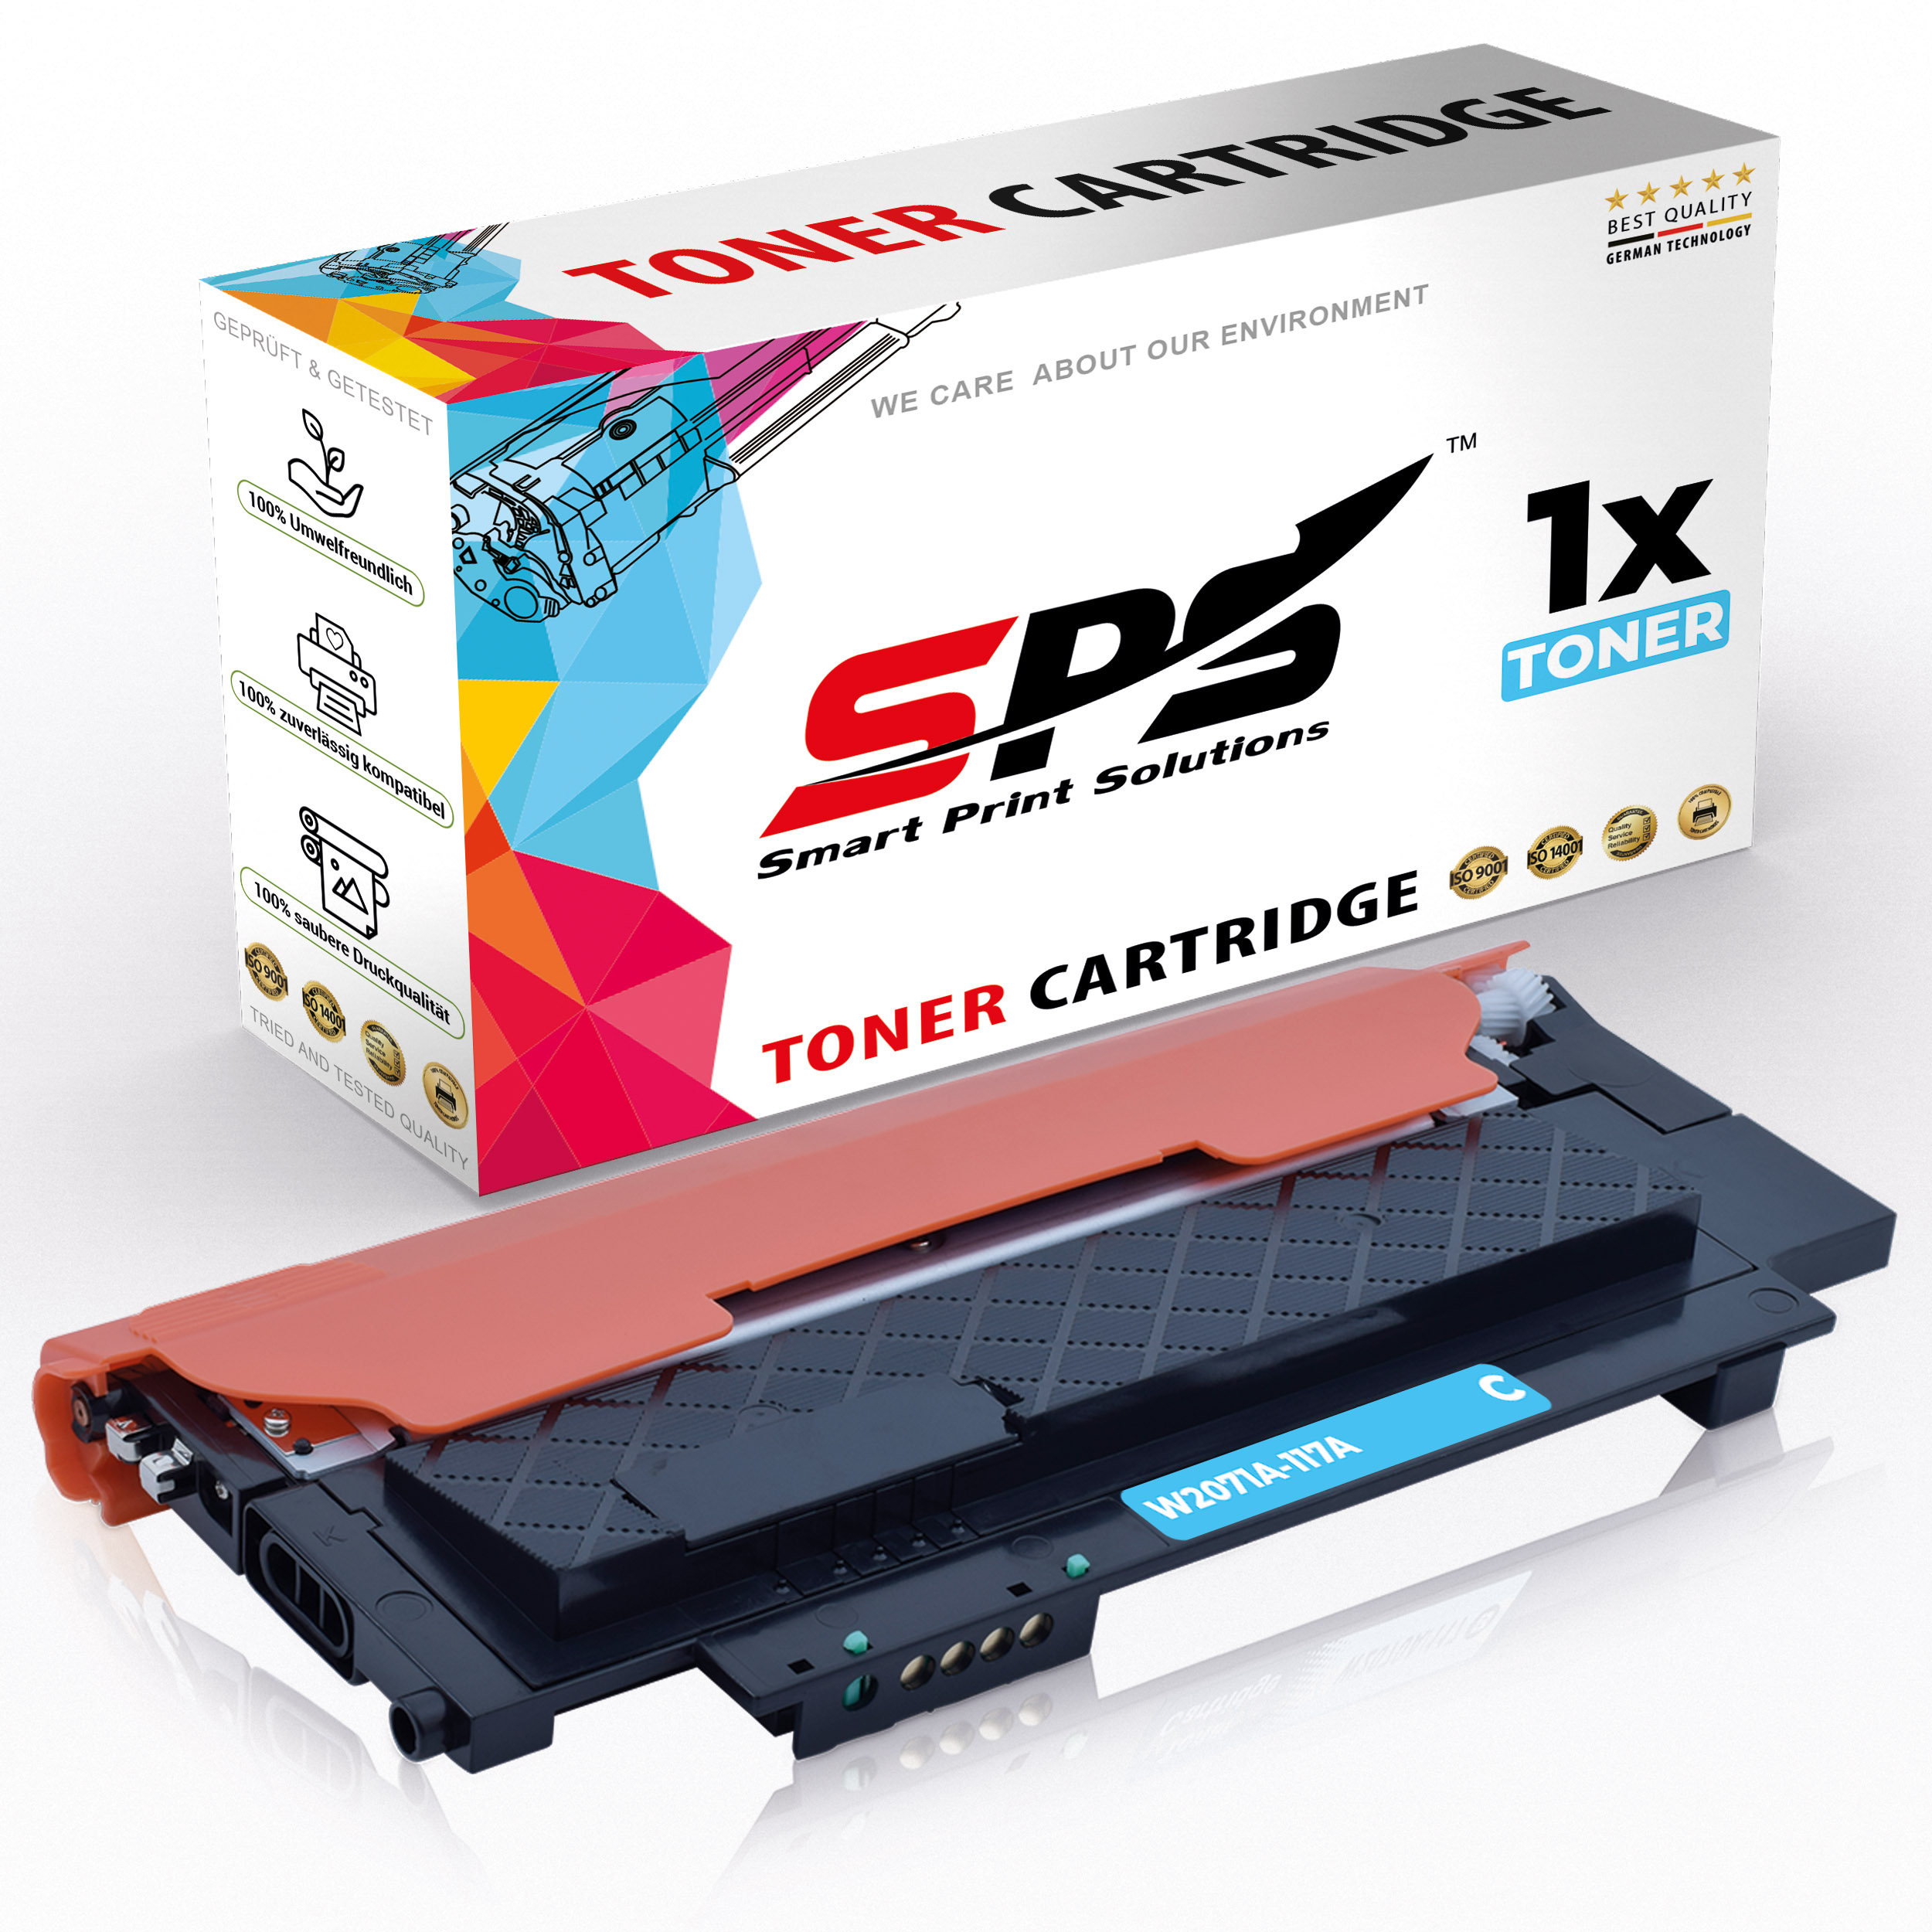 SPS S-16252 Toner MFP / Color W2071A 178NW) Cyan Laser (117A